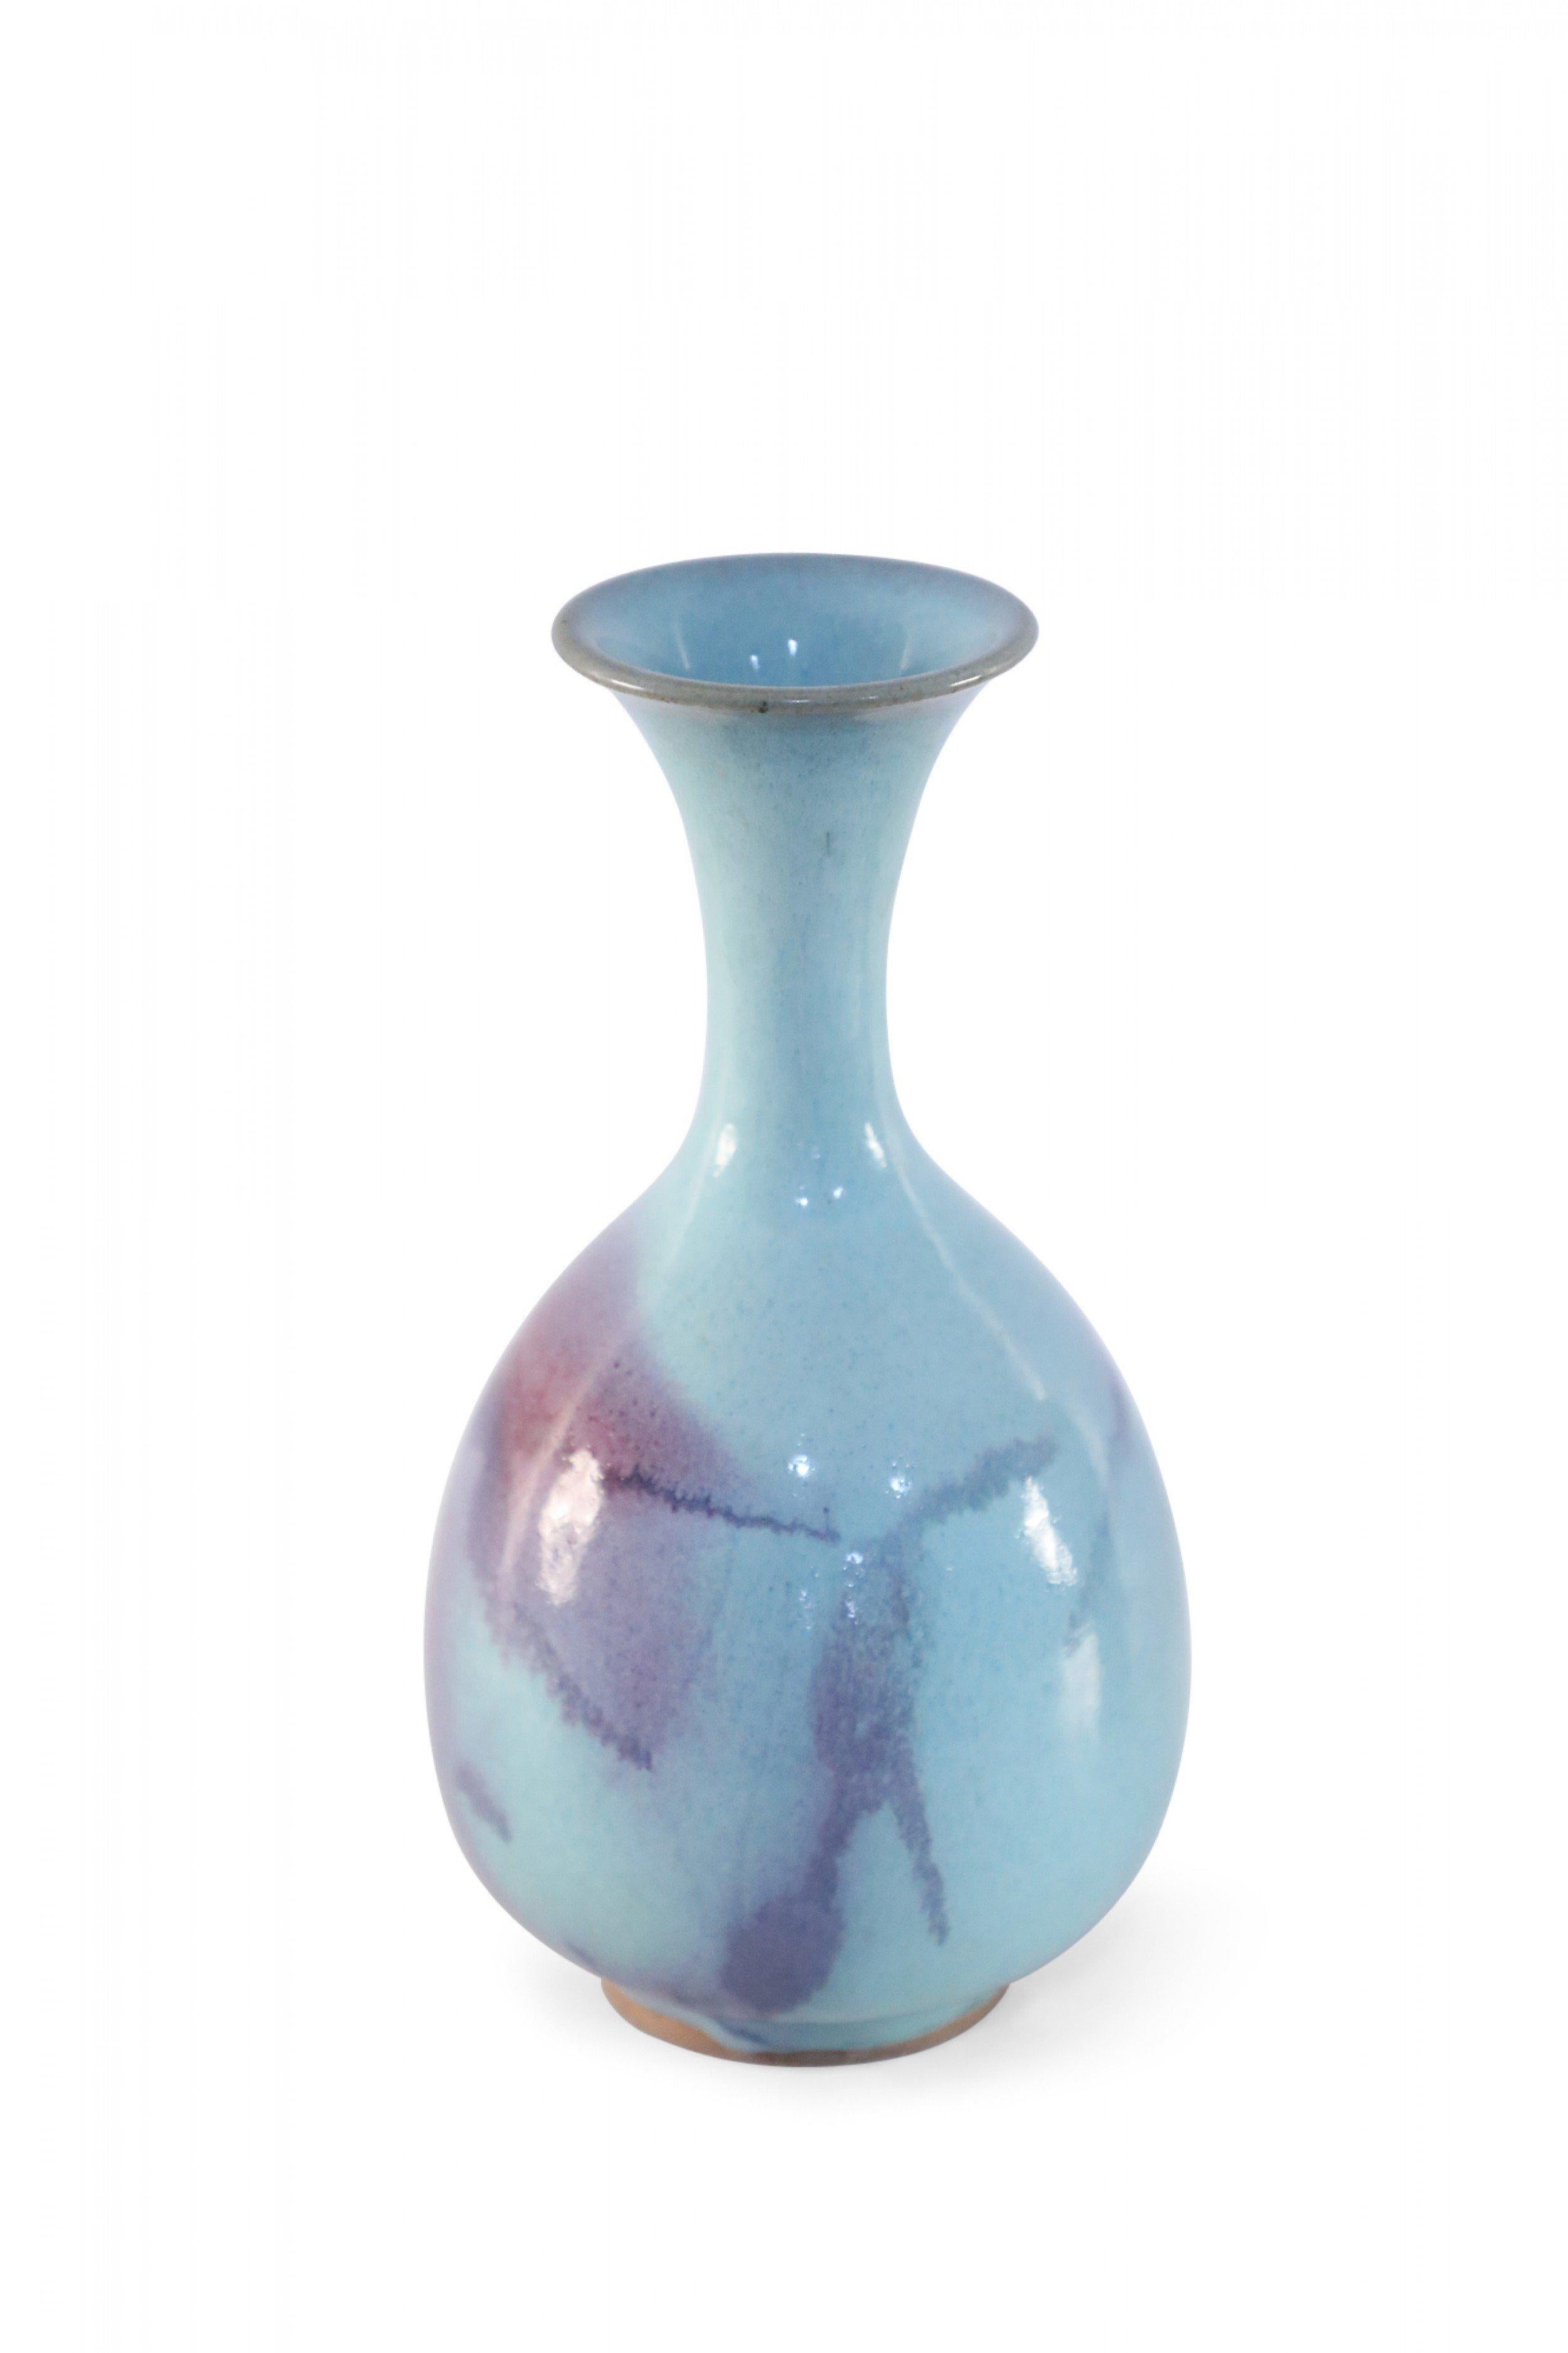 Antique Chinese (16th Century-style) blue vase with purple and pink glazing that creates an ethereal effect across its pear-shaped form.
 